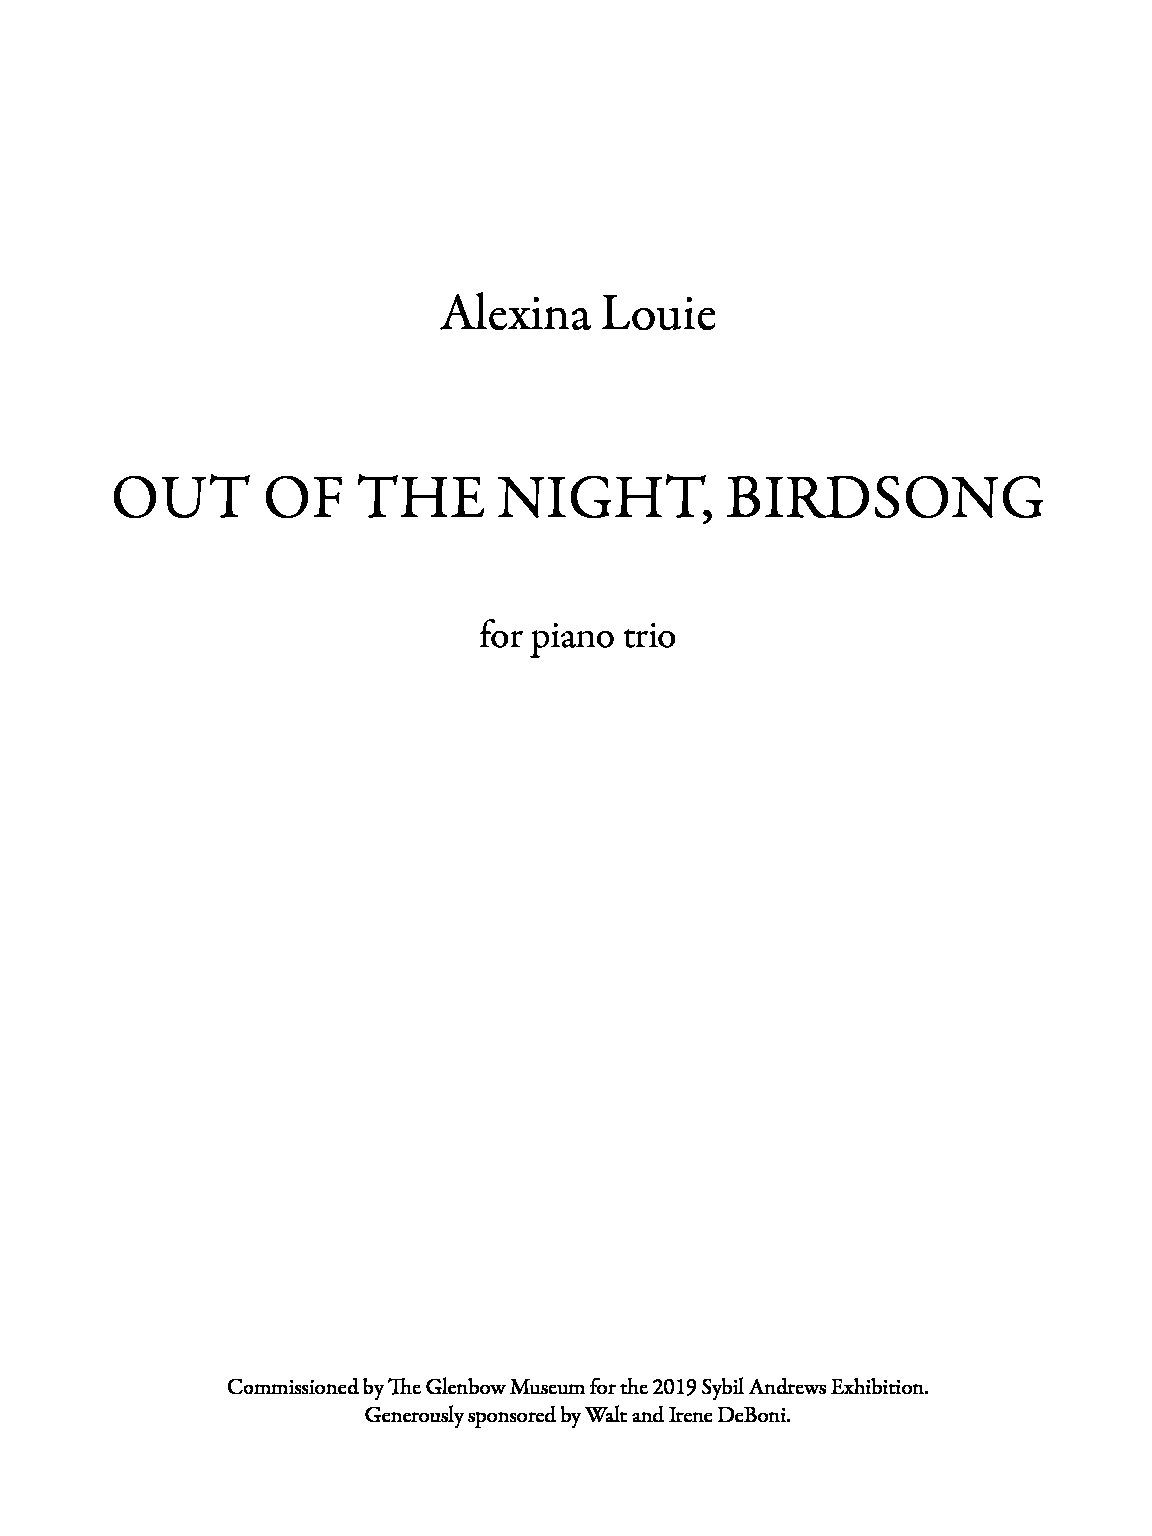 Alexina Louie - Out of the Night, Birdsong - score